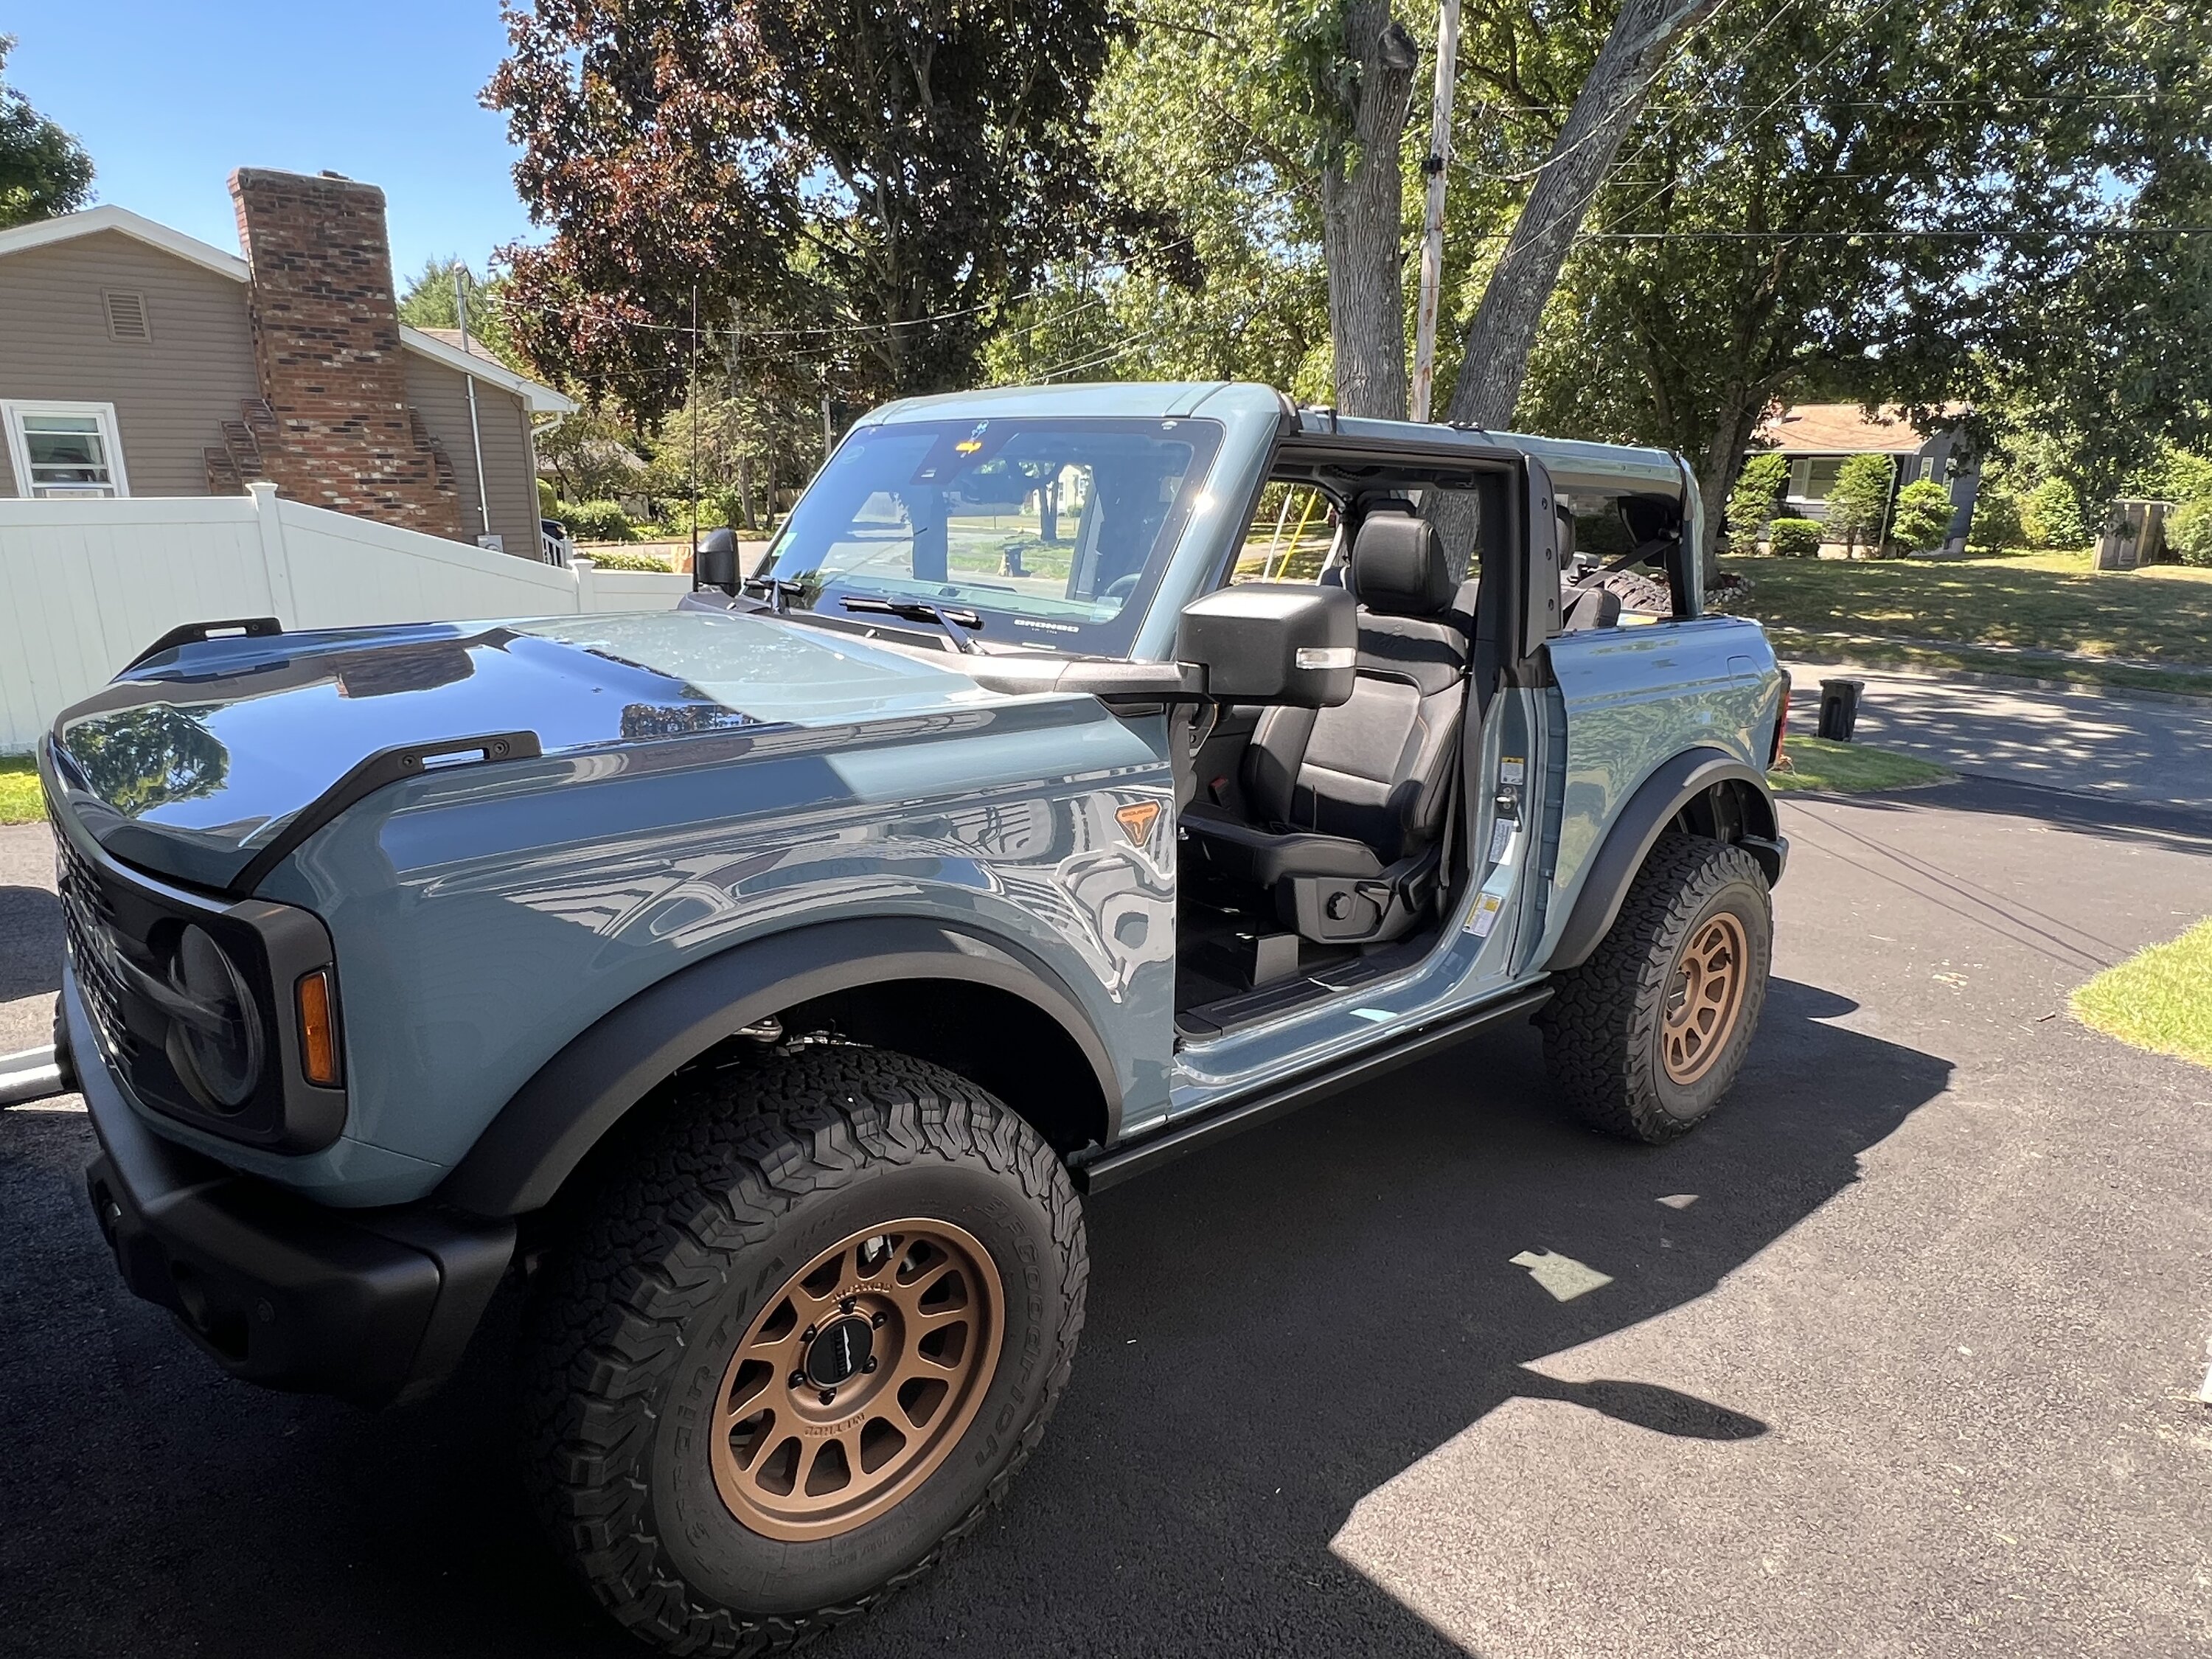 Ford Bronco Let’s see your doors off pics… 09D72A93-2AF0-429A-BBA0-F2EC25171032